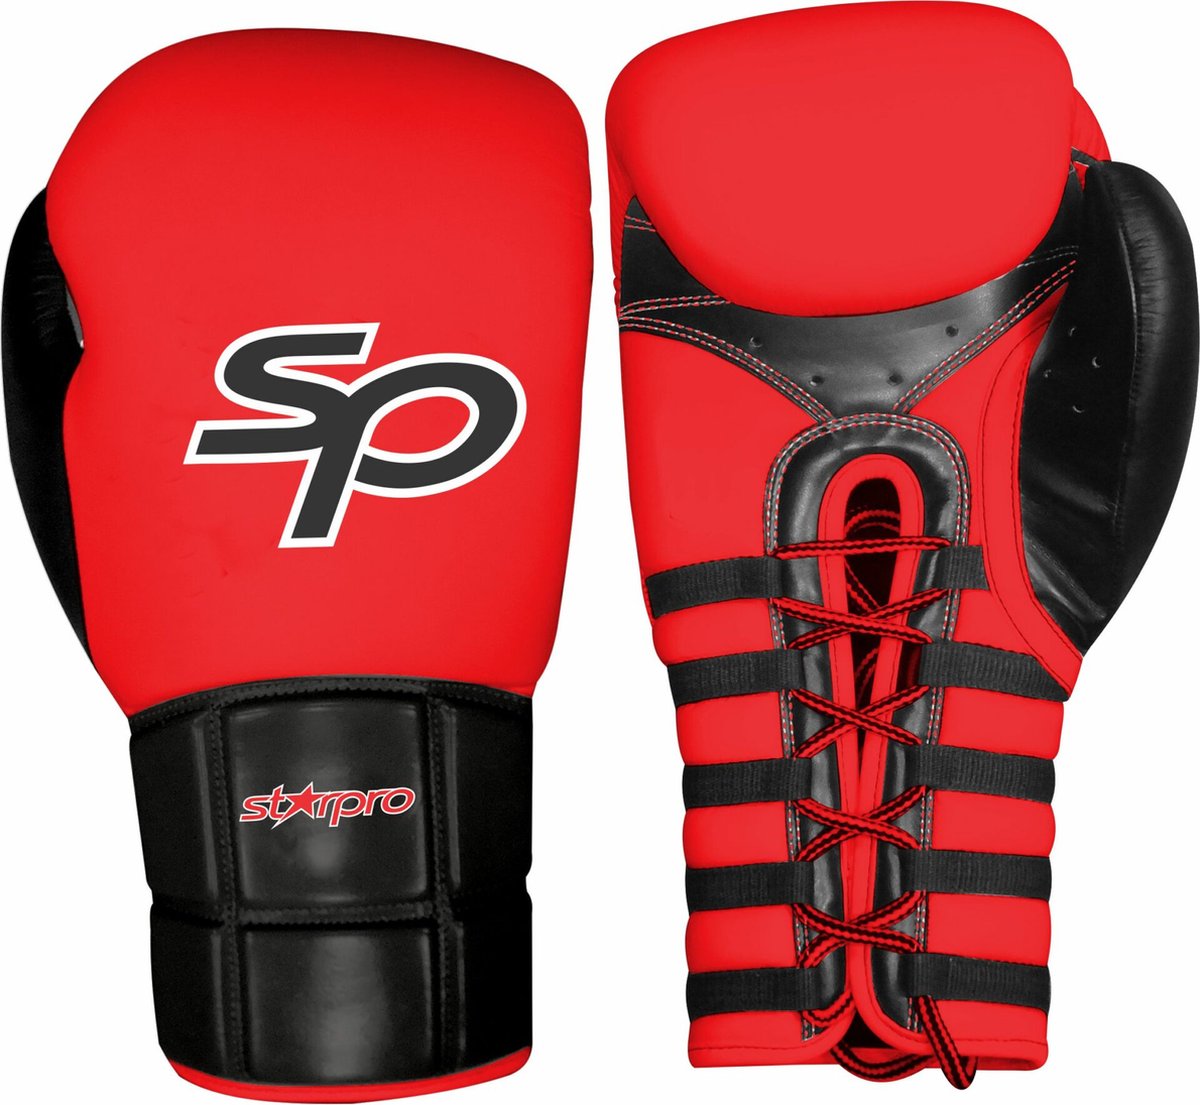 Safety Sparring Boxing Glove Layered Foam | Rood / Zwart (Maat: 18OZ)